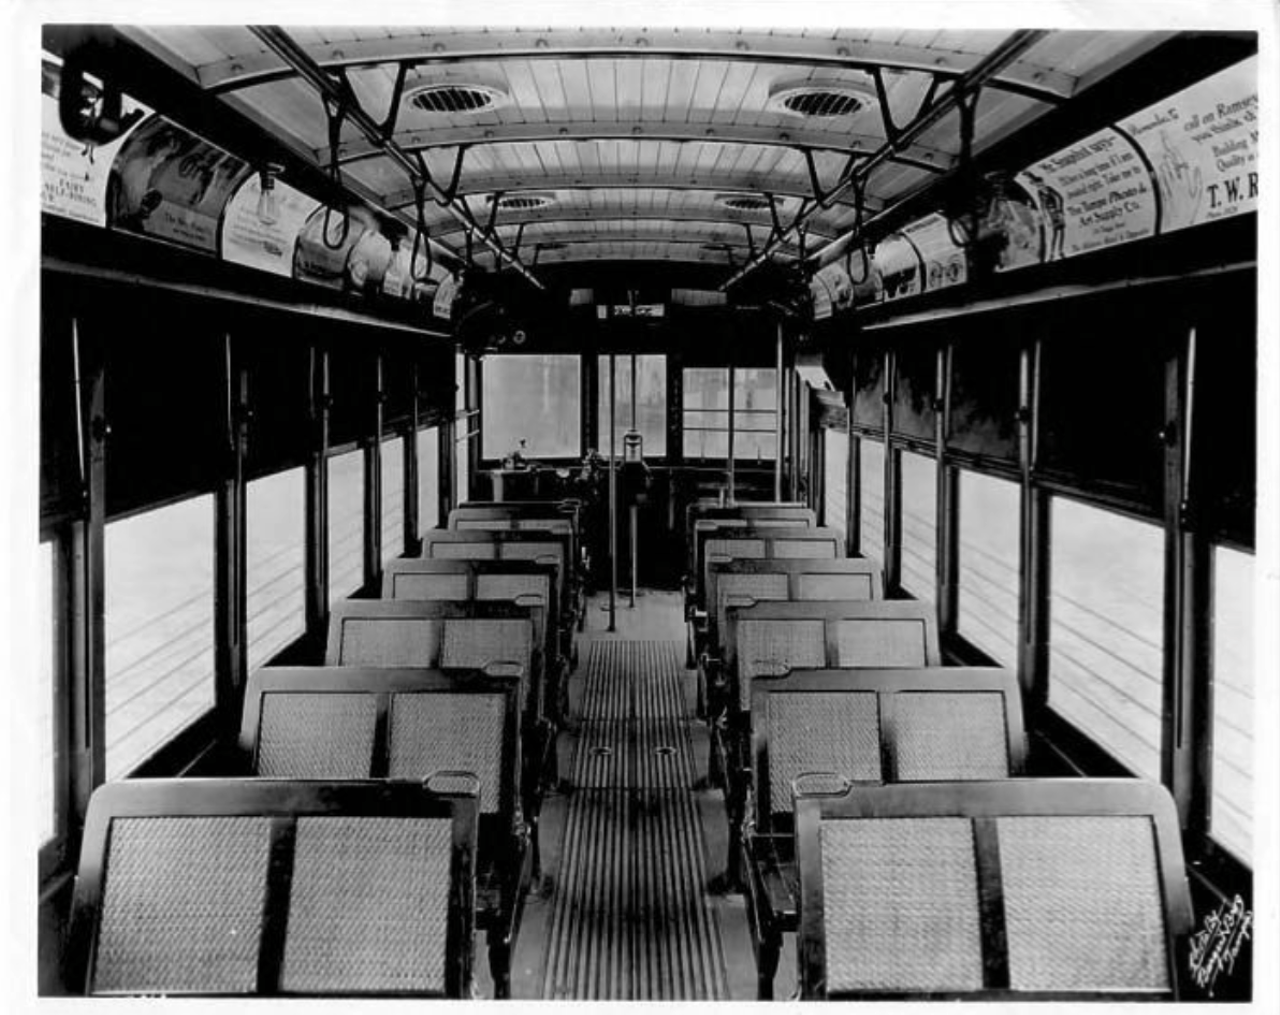 Interior view of Streetcar No. 131, seating, advertisements and coinbox in Tampa, Florida in 1919.
Photo by Burgert Brothers via Tampa-Hillsborough County Public Library System